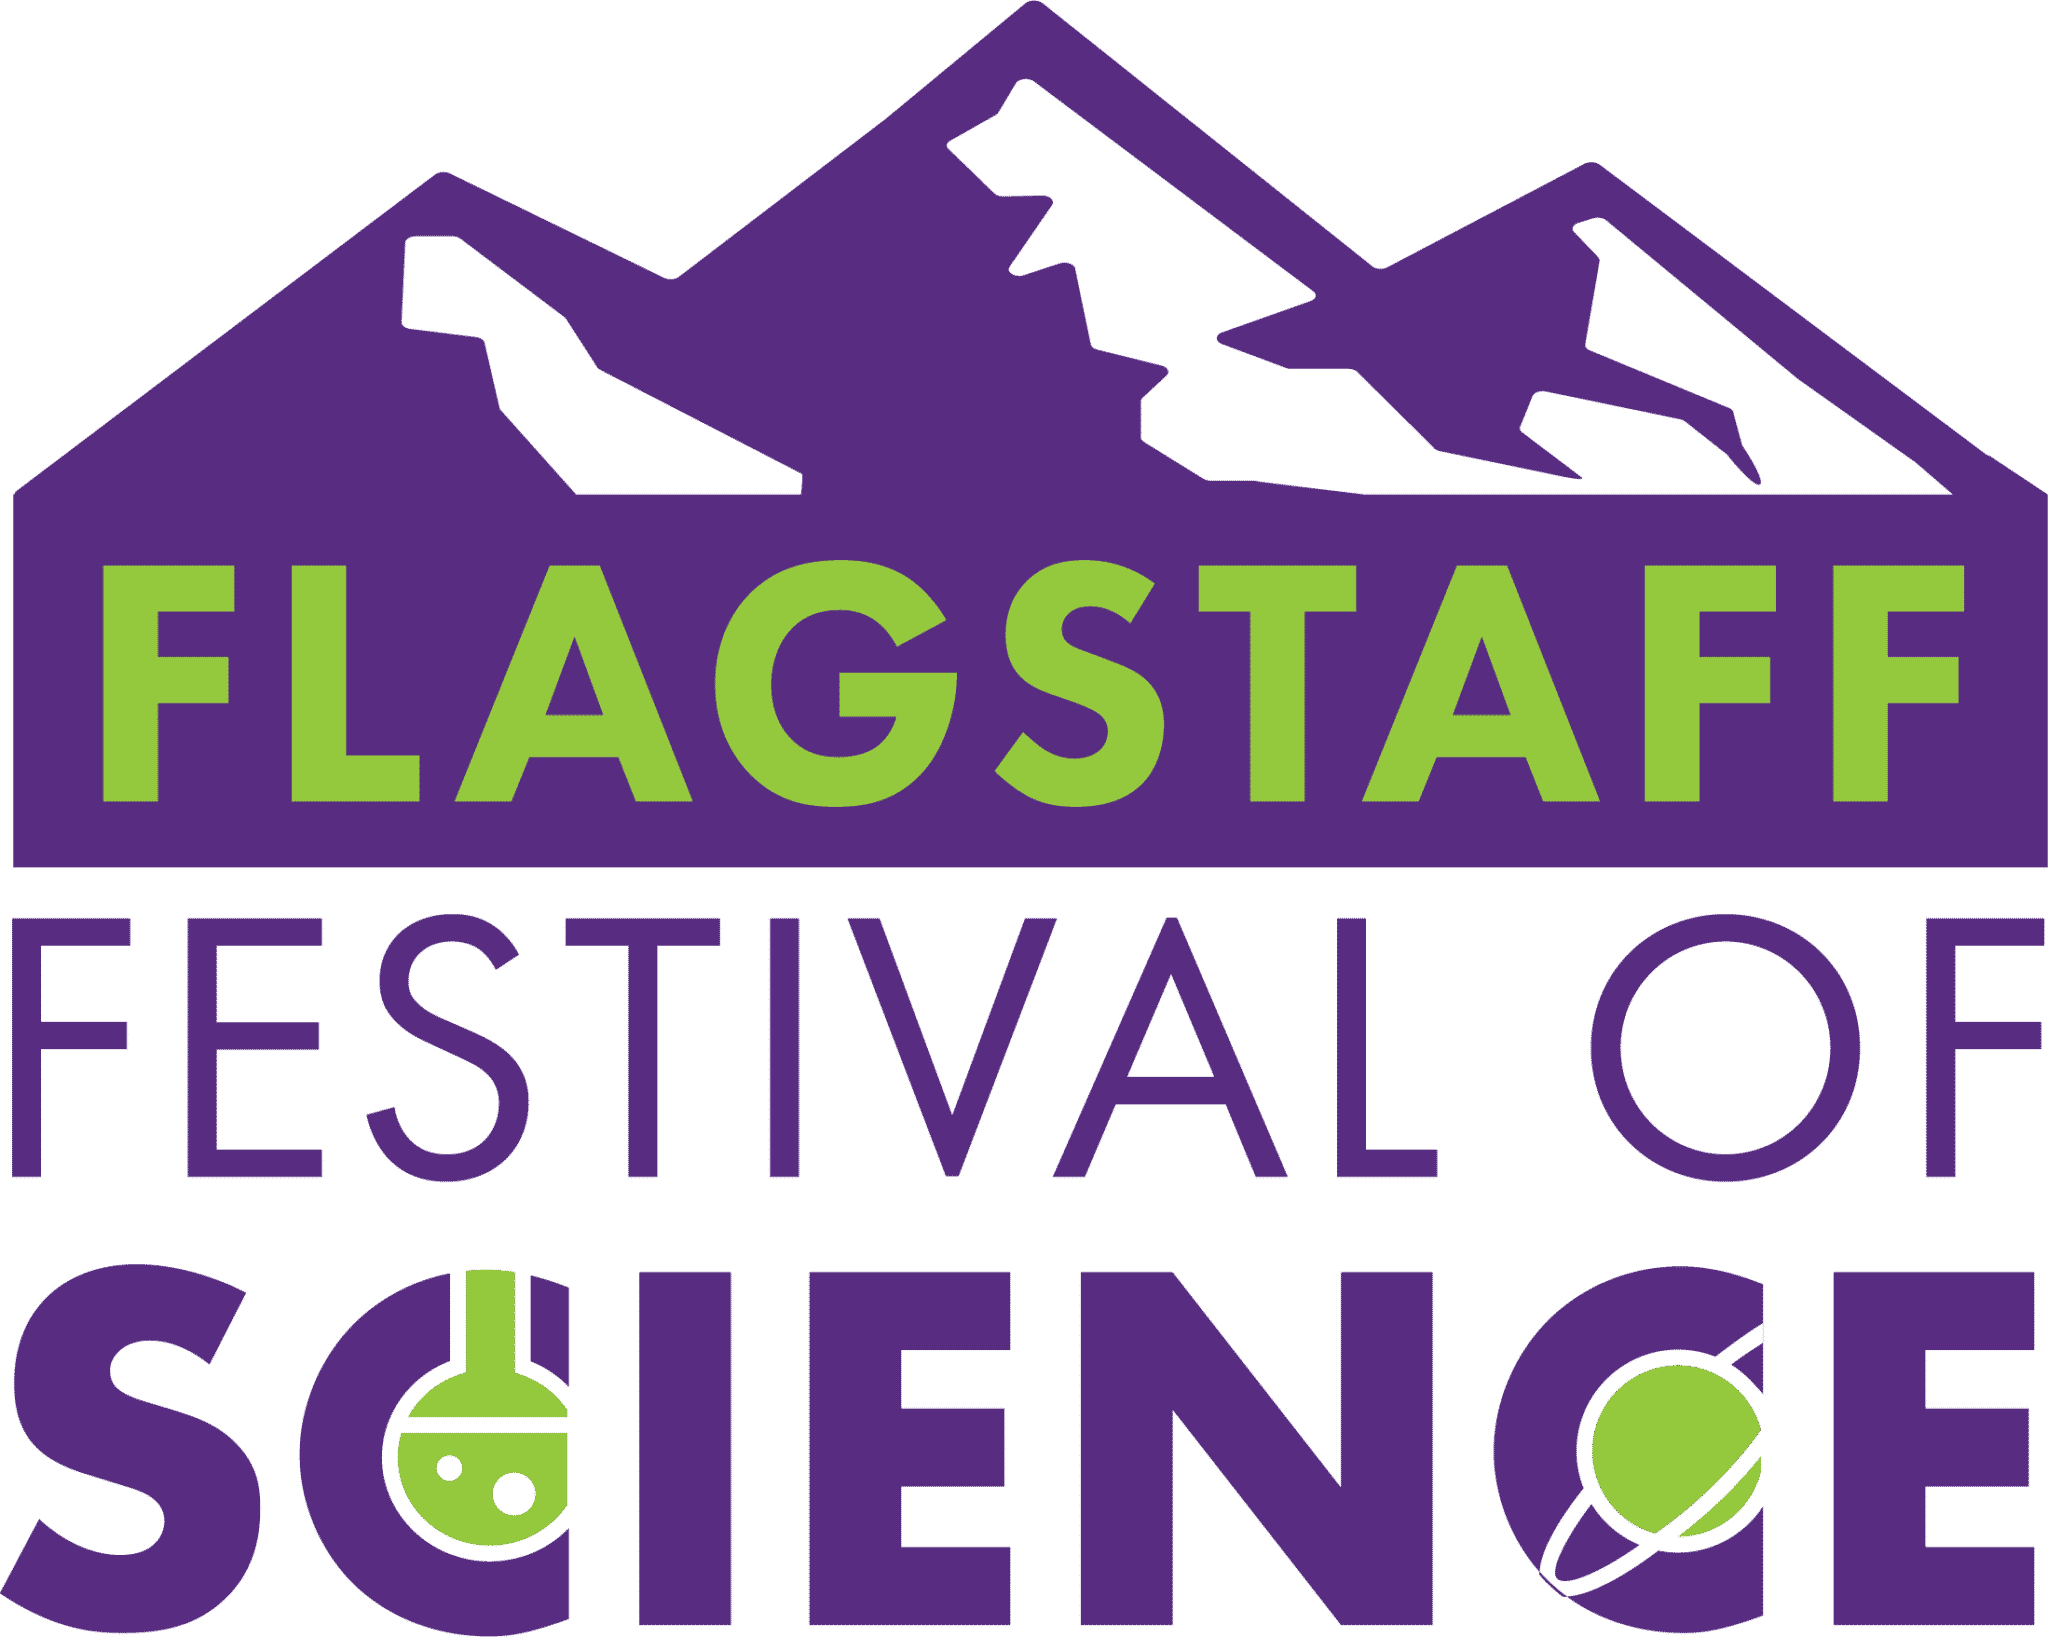 Reserve Your Tickets to Flagstaff Festival of Science Events Today